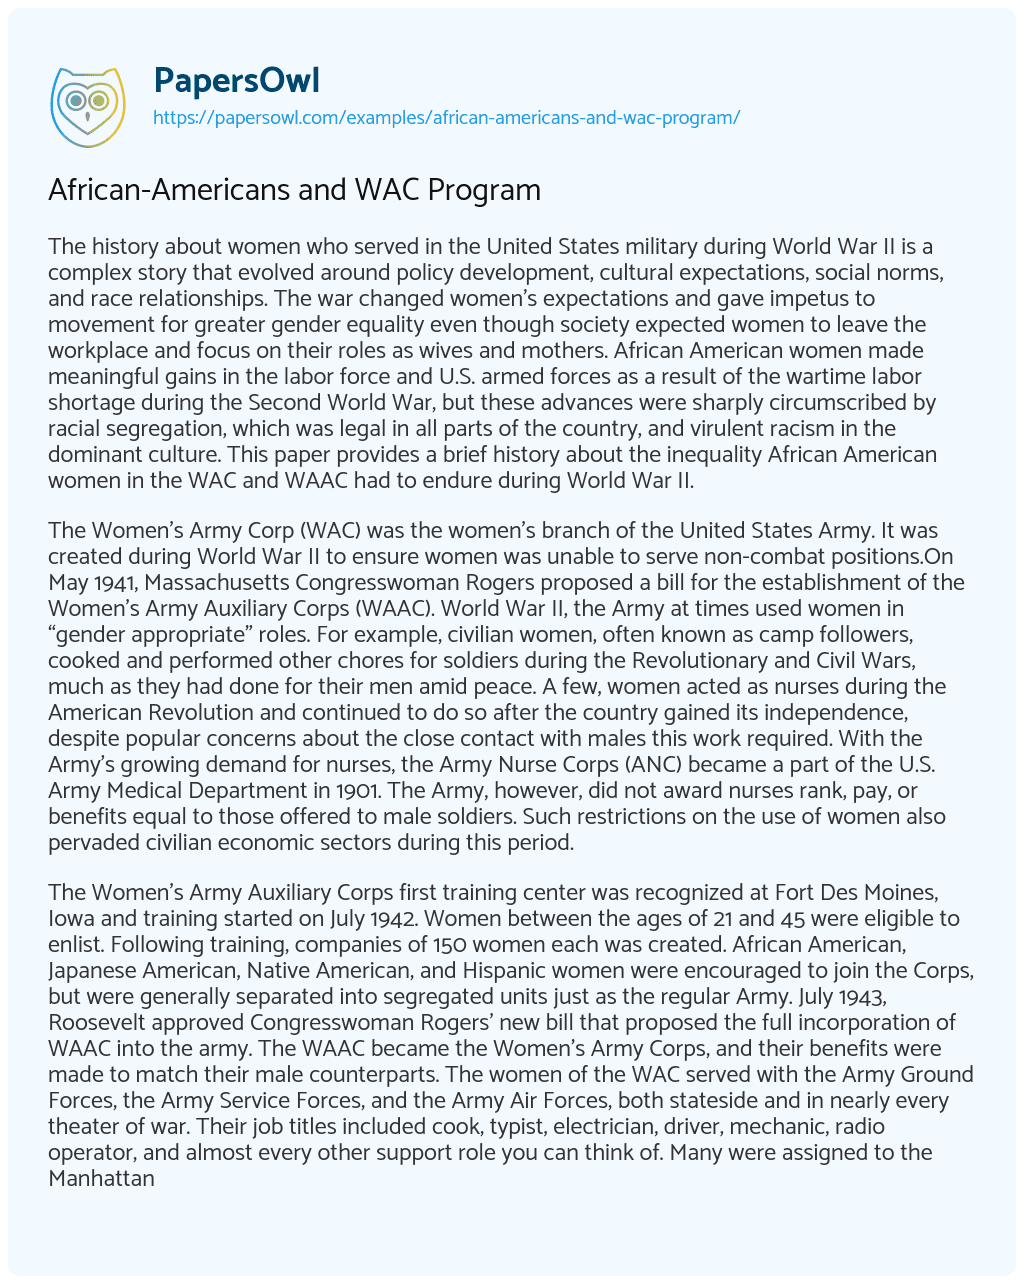 Essay on African-Americans and WAC Program